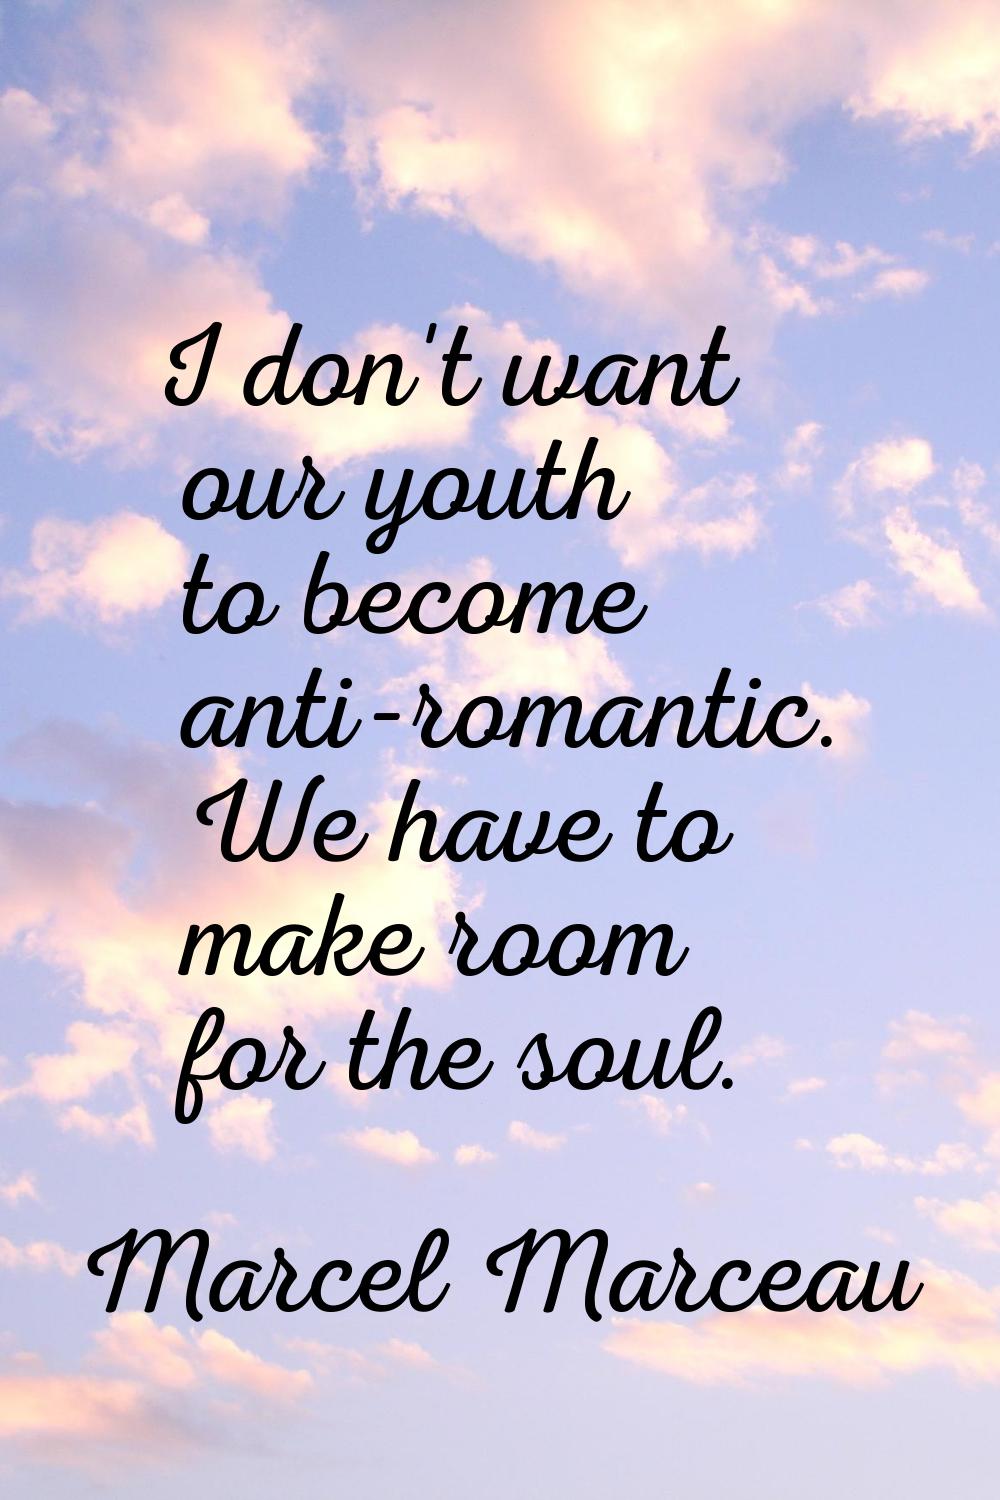 I don't want our youth to become anti-romantic. We have to make room for the soul.